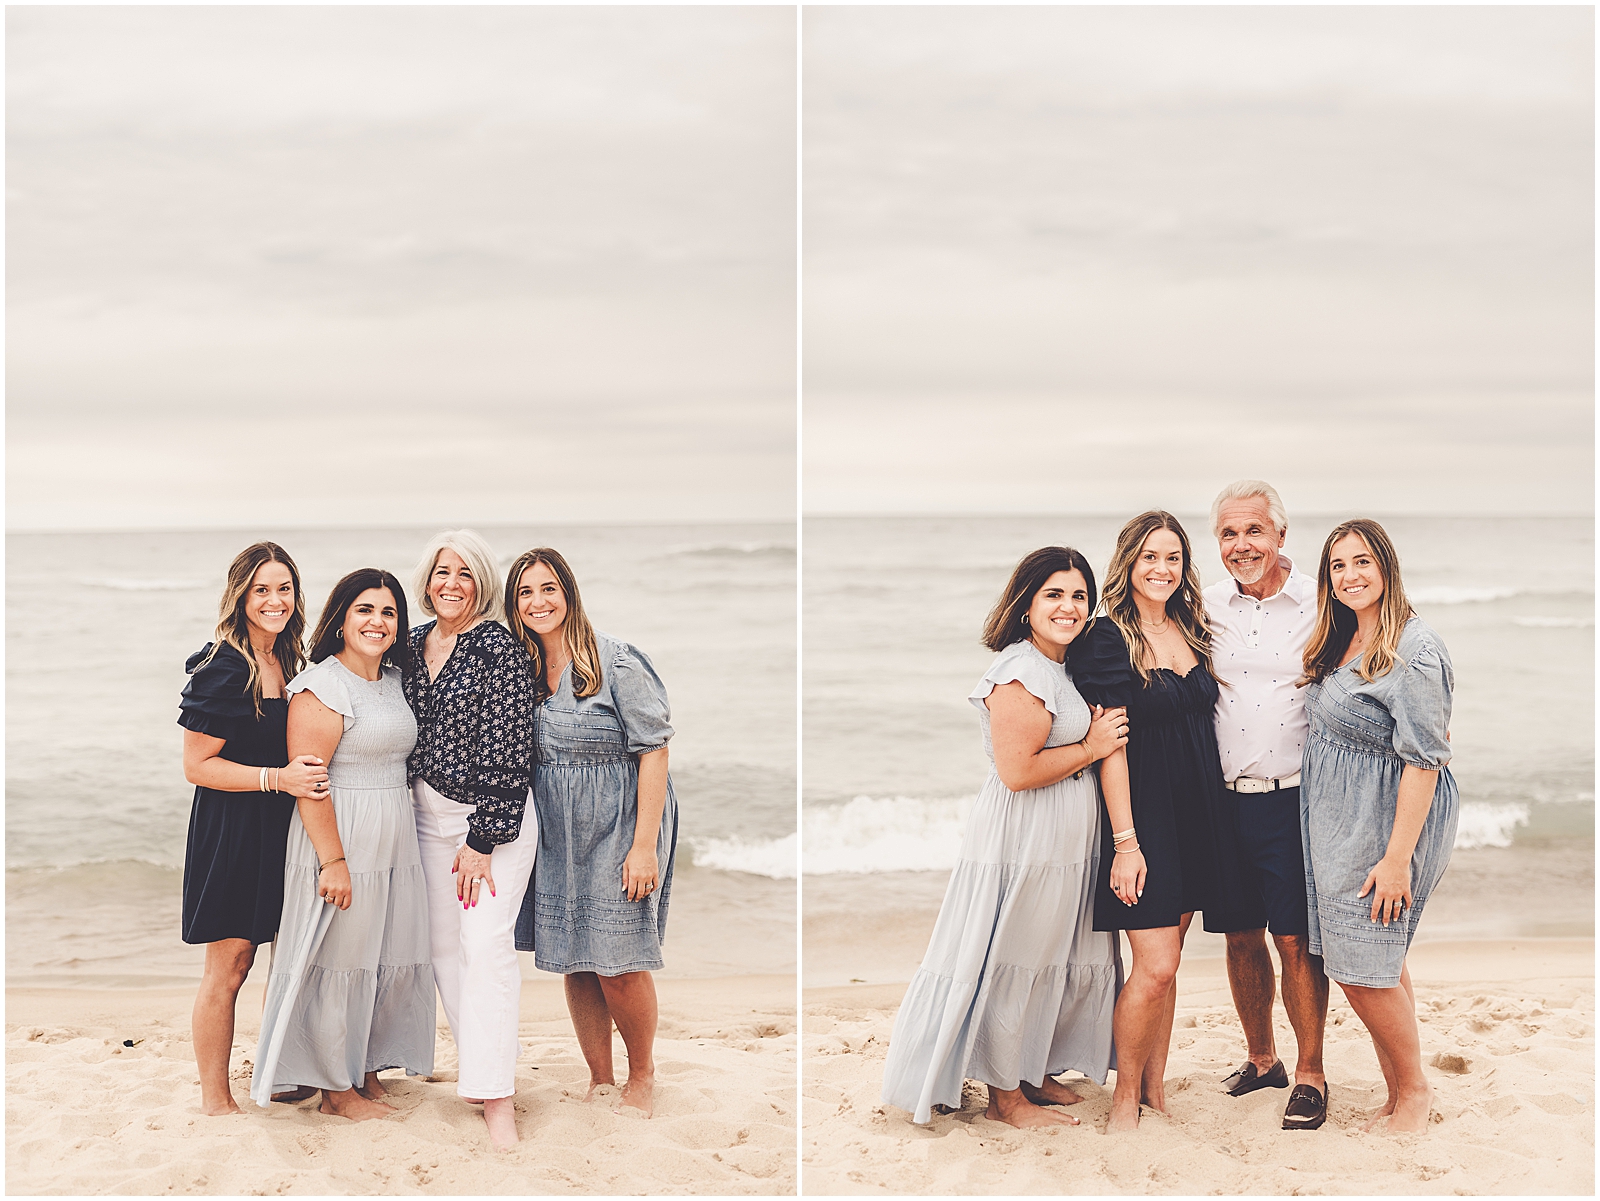 Beach family session for the Trump family in Michigan City with Bourbonnais & Kankakee County family photographer Kara Evans Photographer.